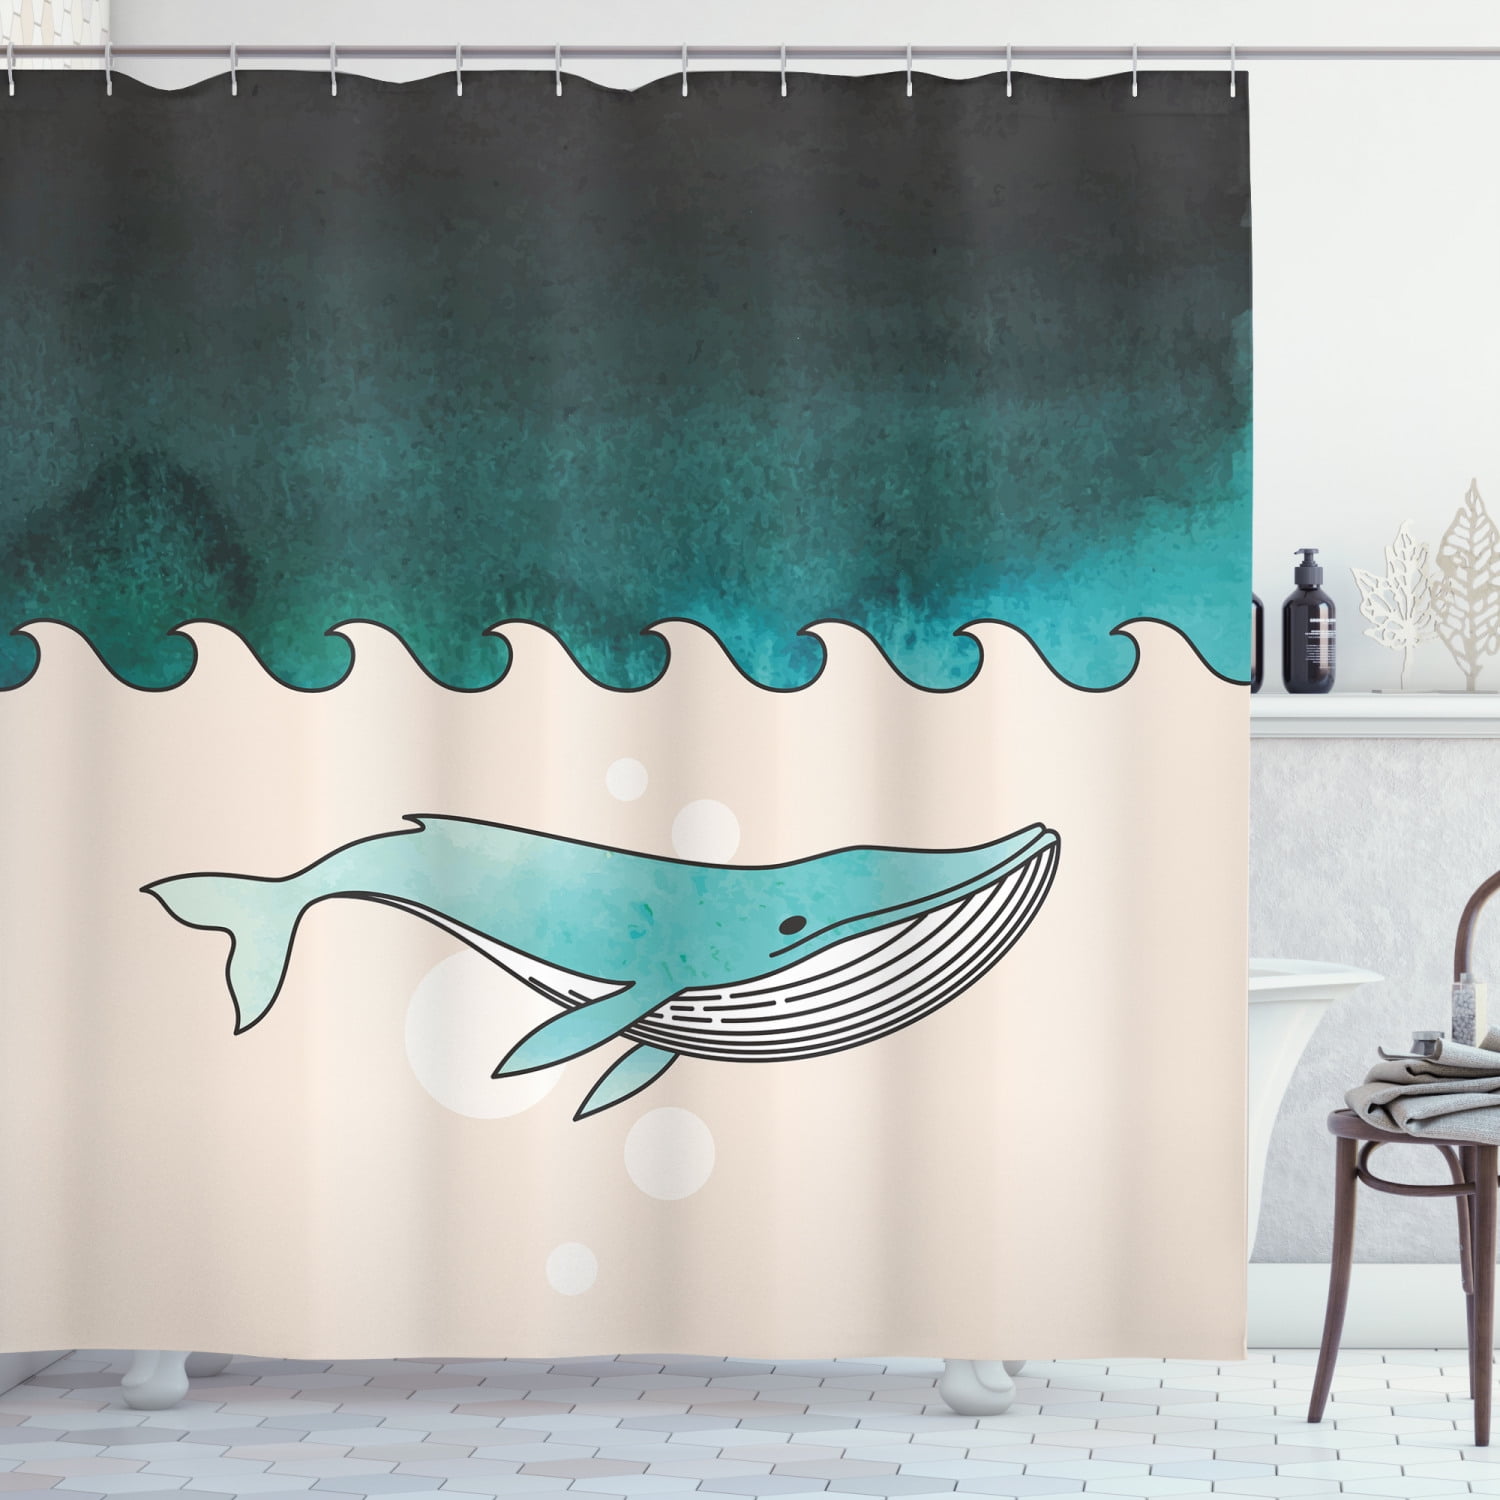 Whale Shower Curtain Fish Swimming In, Shower Curtain Fish Ocean Blue